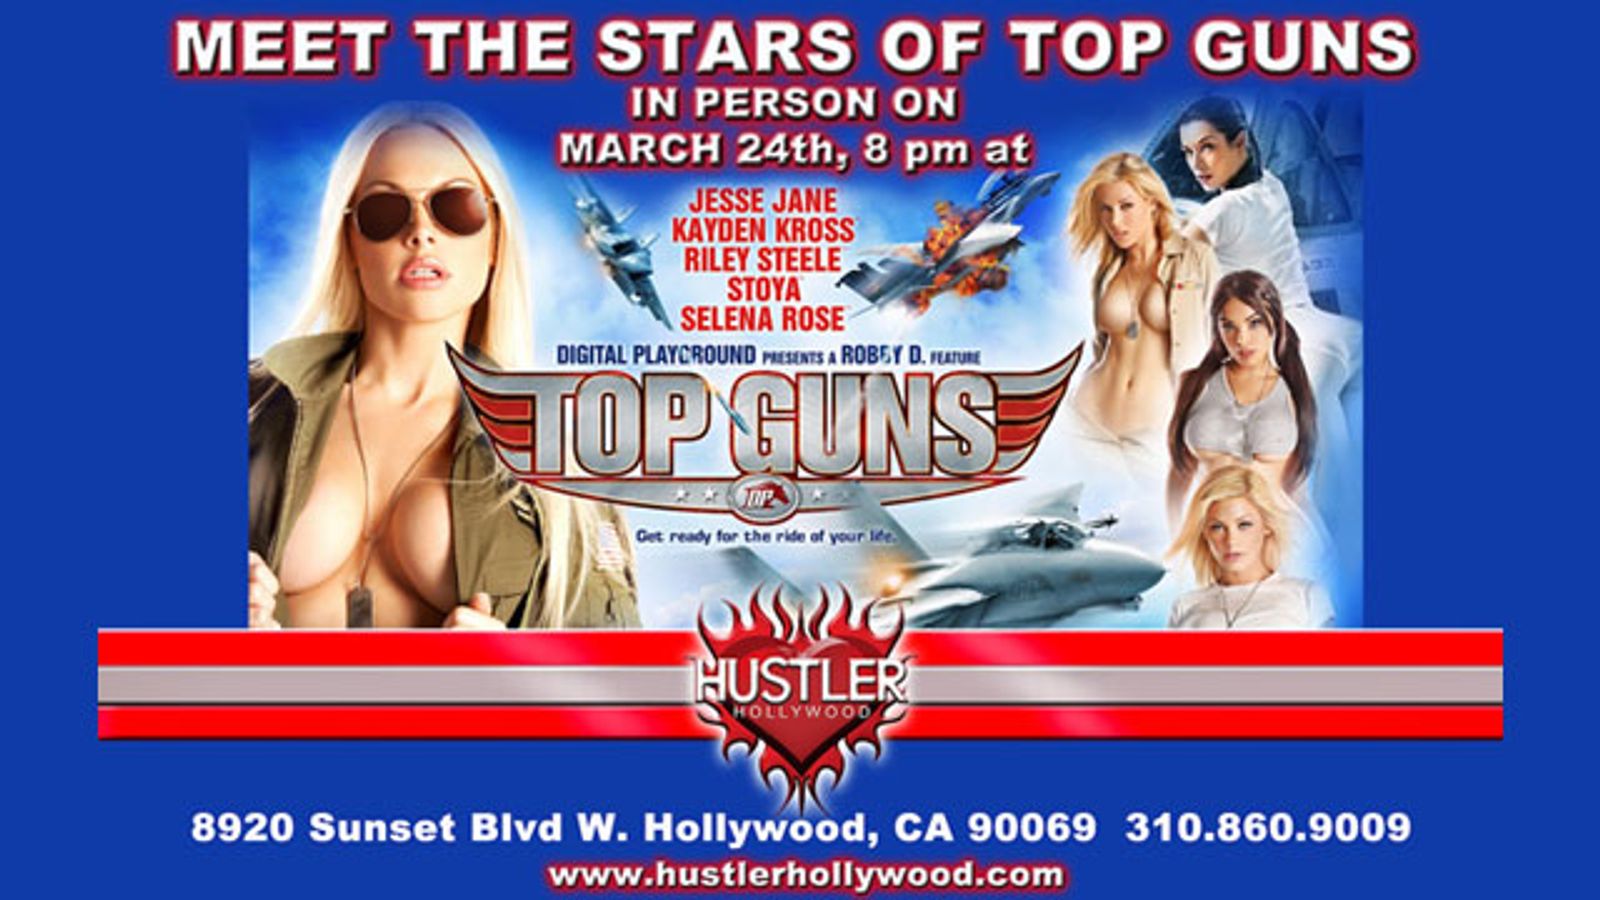 Fan Will Win a Skype Session with a 'Top Guns' Star March 24